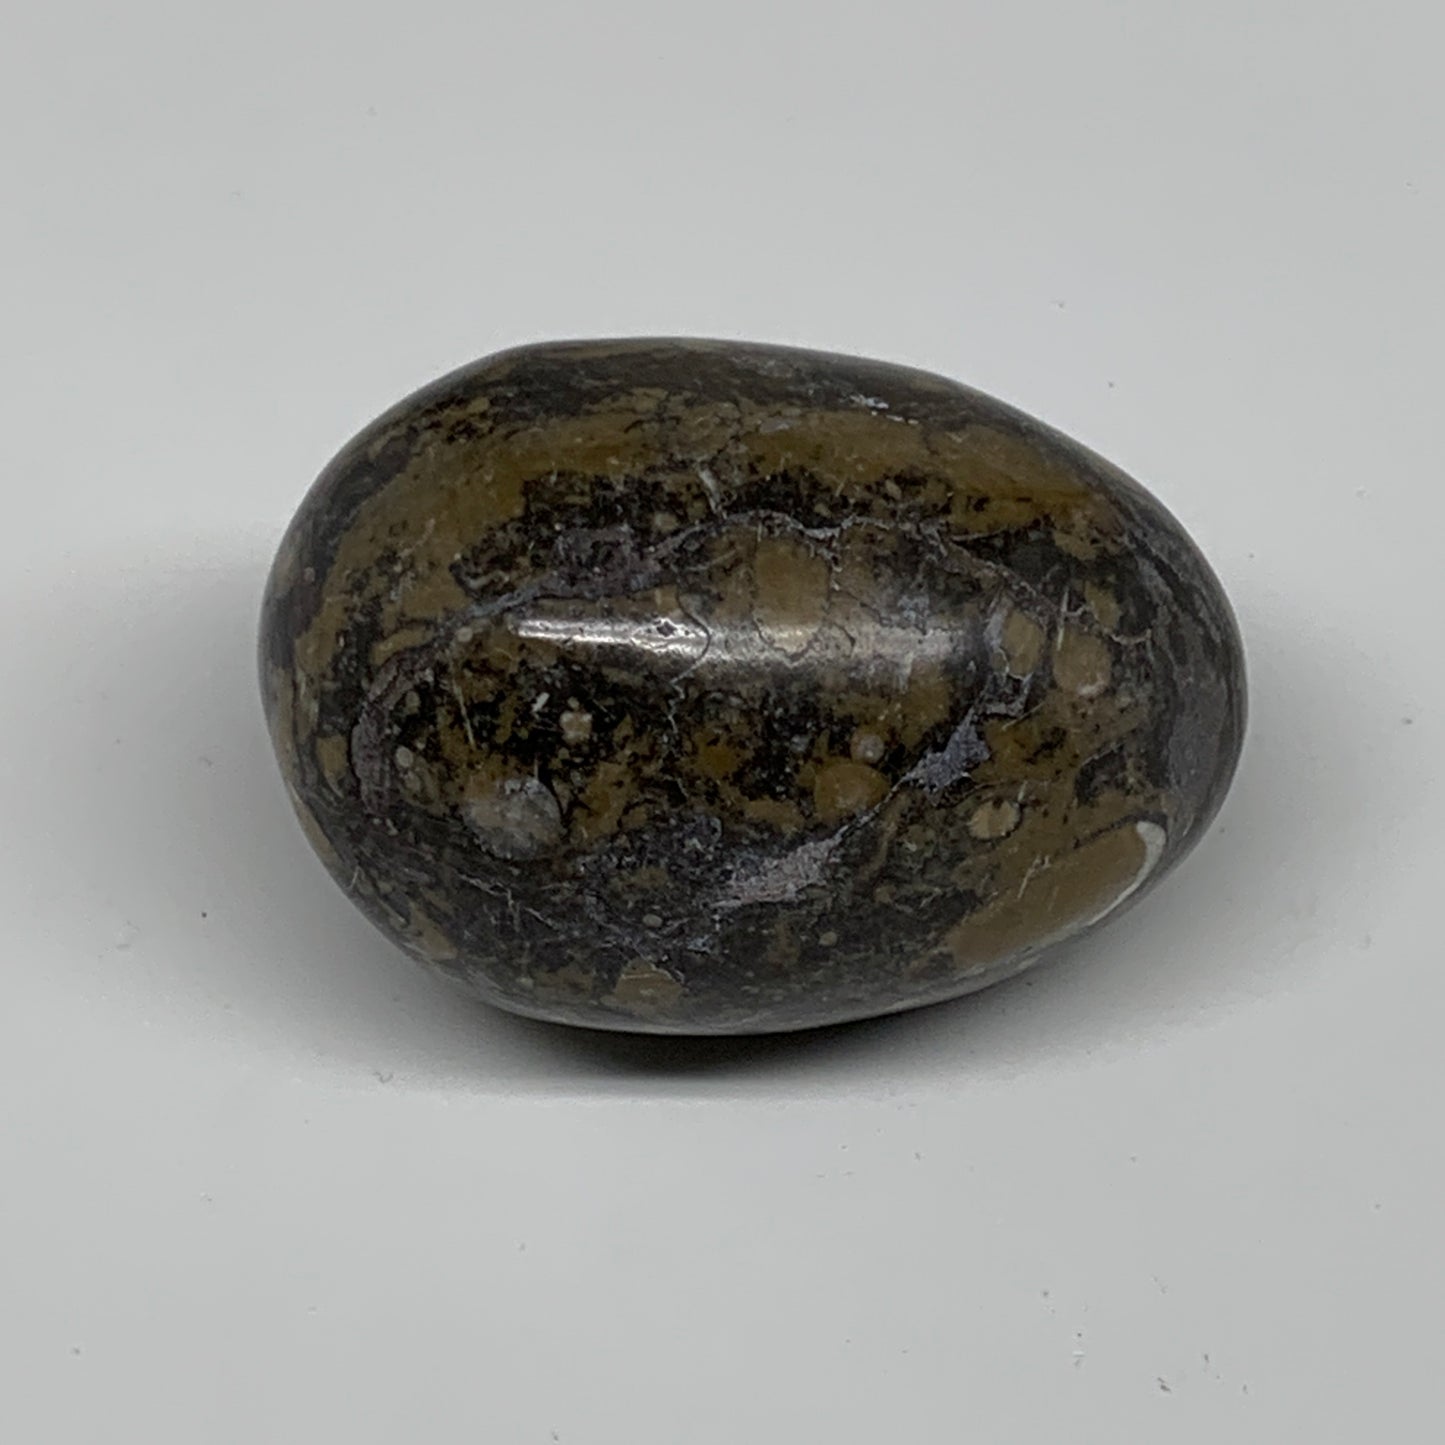 179.2g, 2.4"x1.7", Natural Fossil Orthoceras Stone Egg from Morocco, B31043